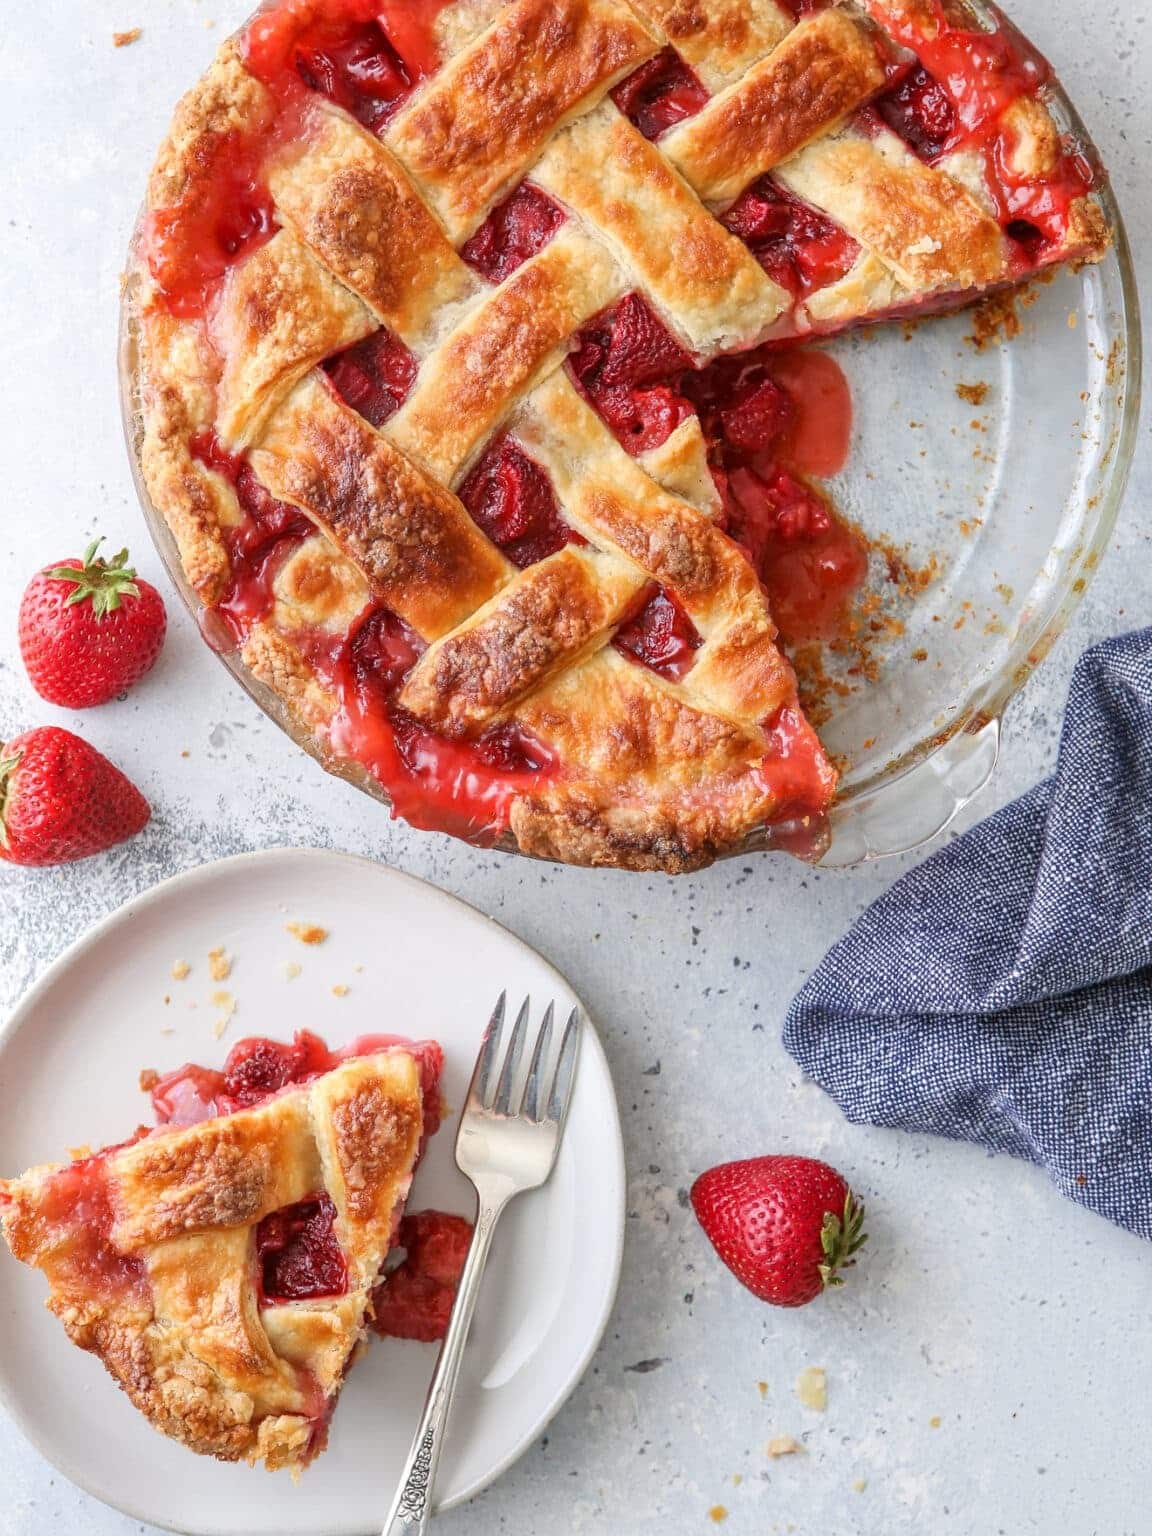 A strawberry pie with a beautifully woven lattice crust sliced, served on a plate.